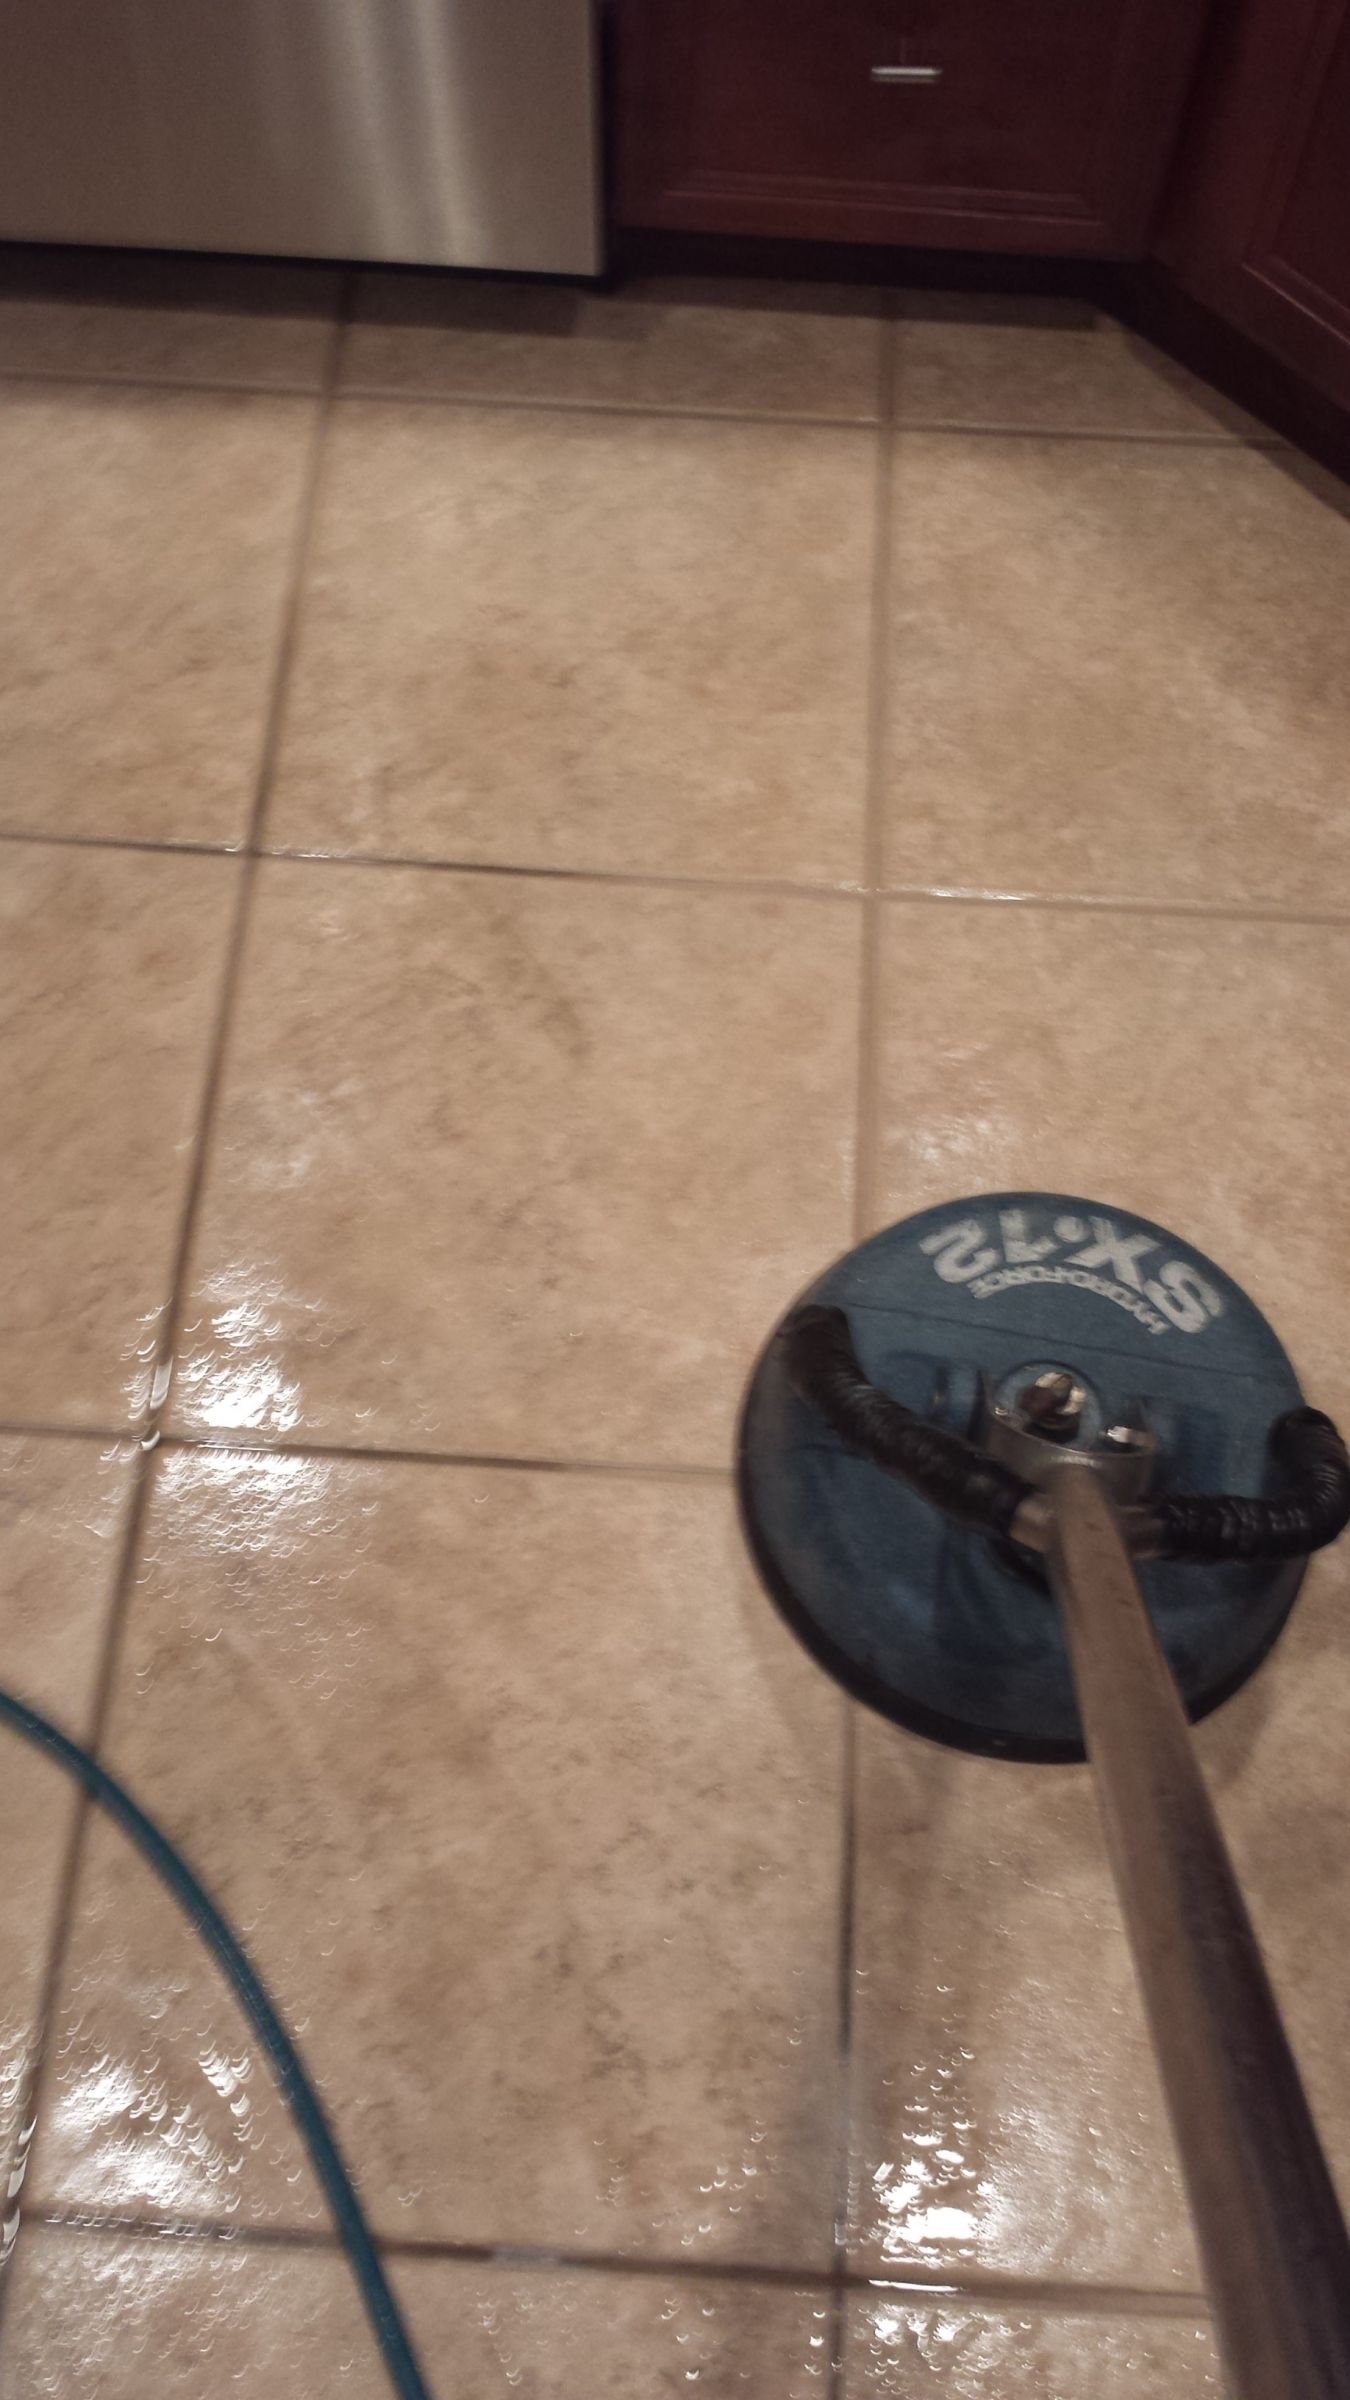 Schedule a Tile and Grout Cleaning Service Now